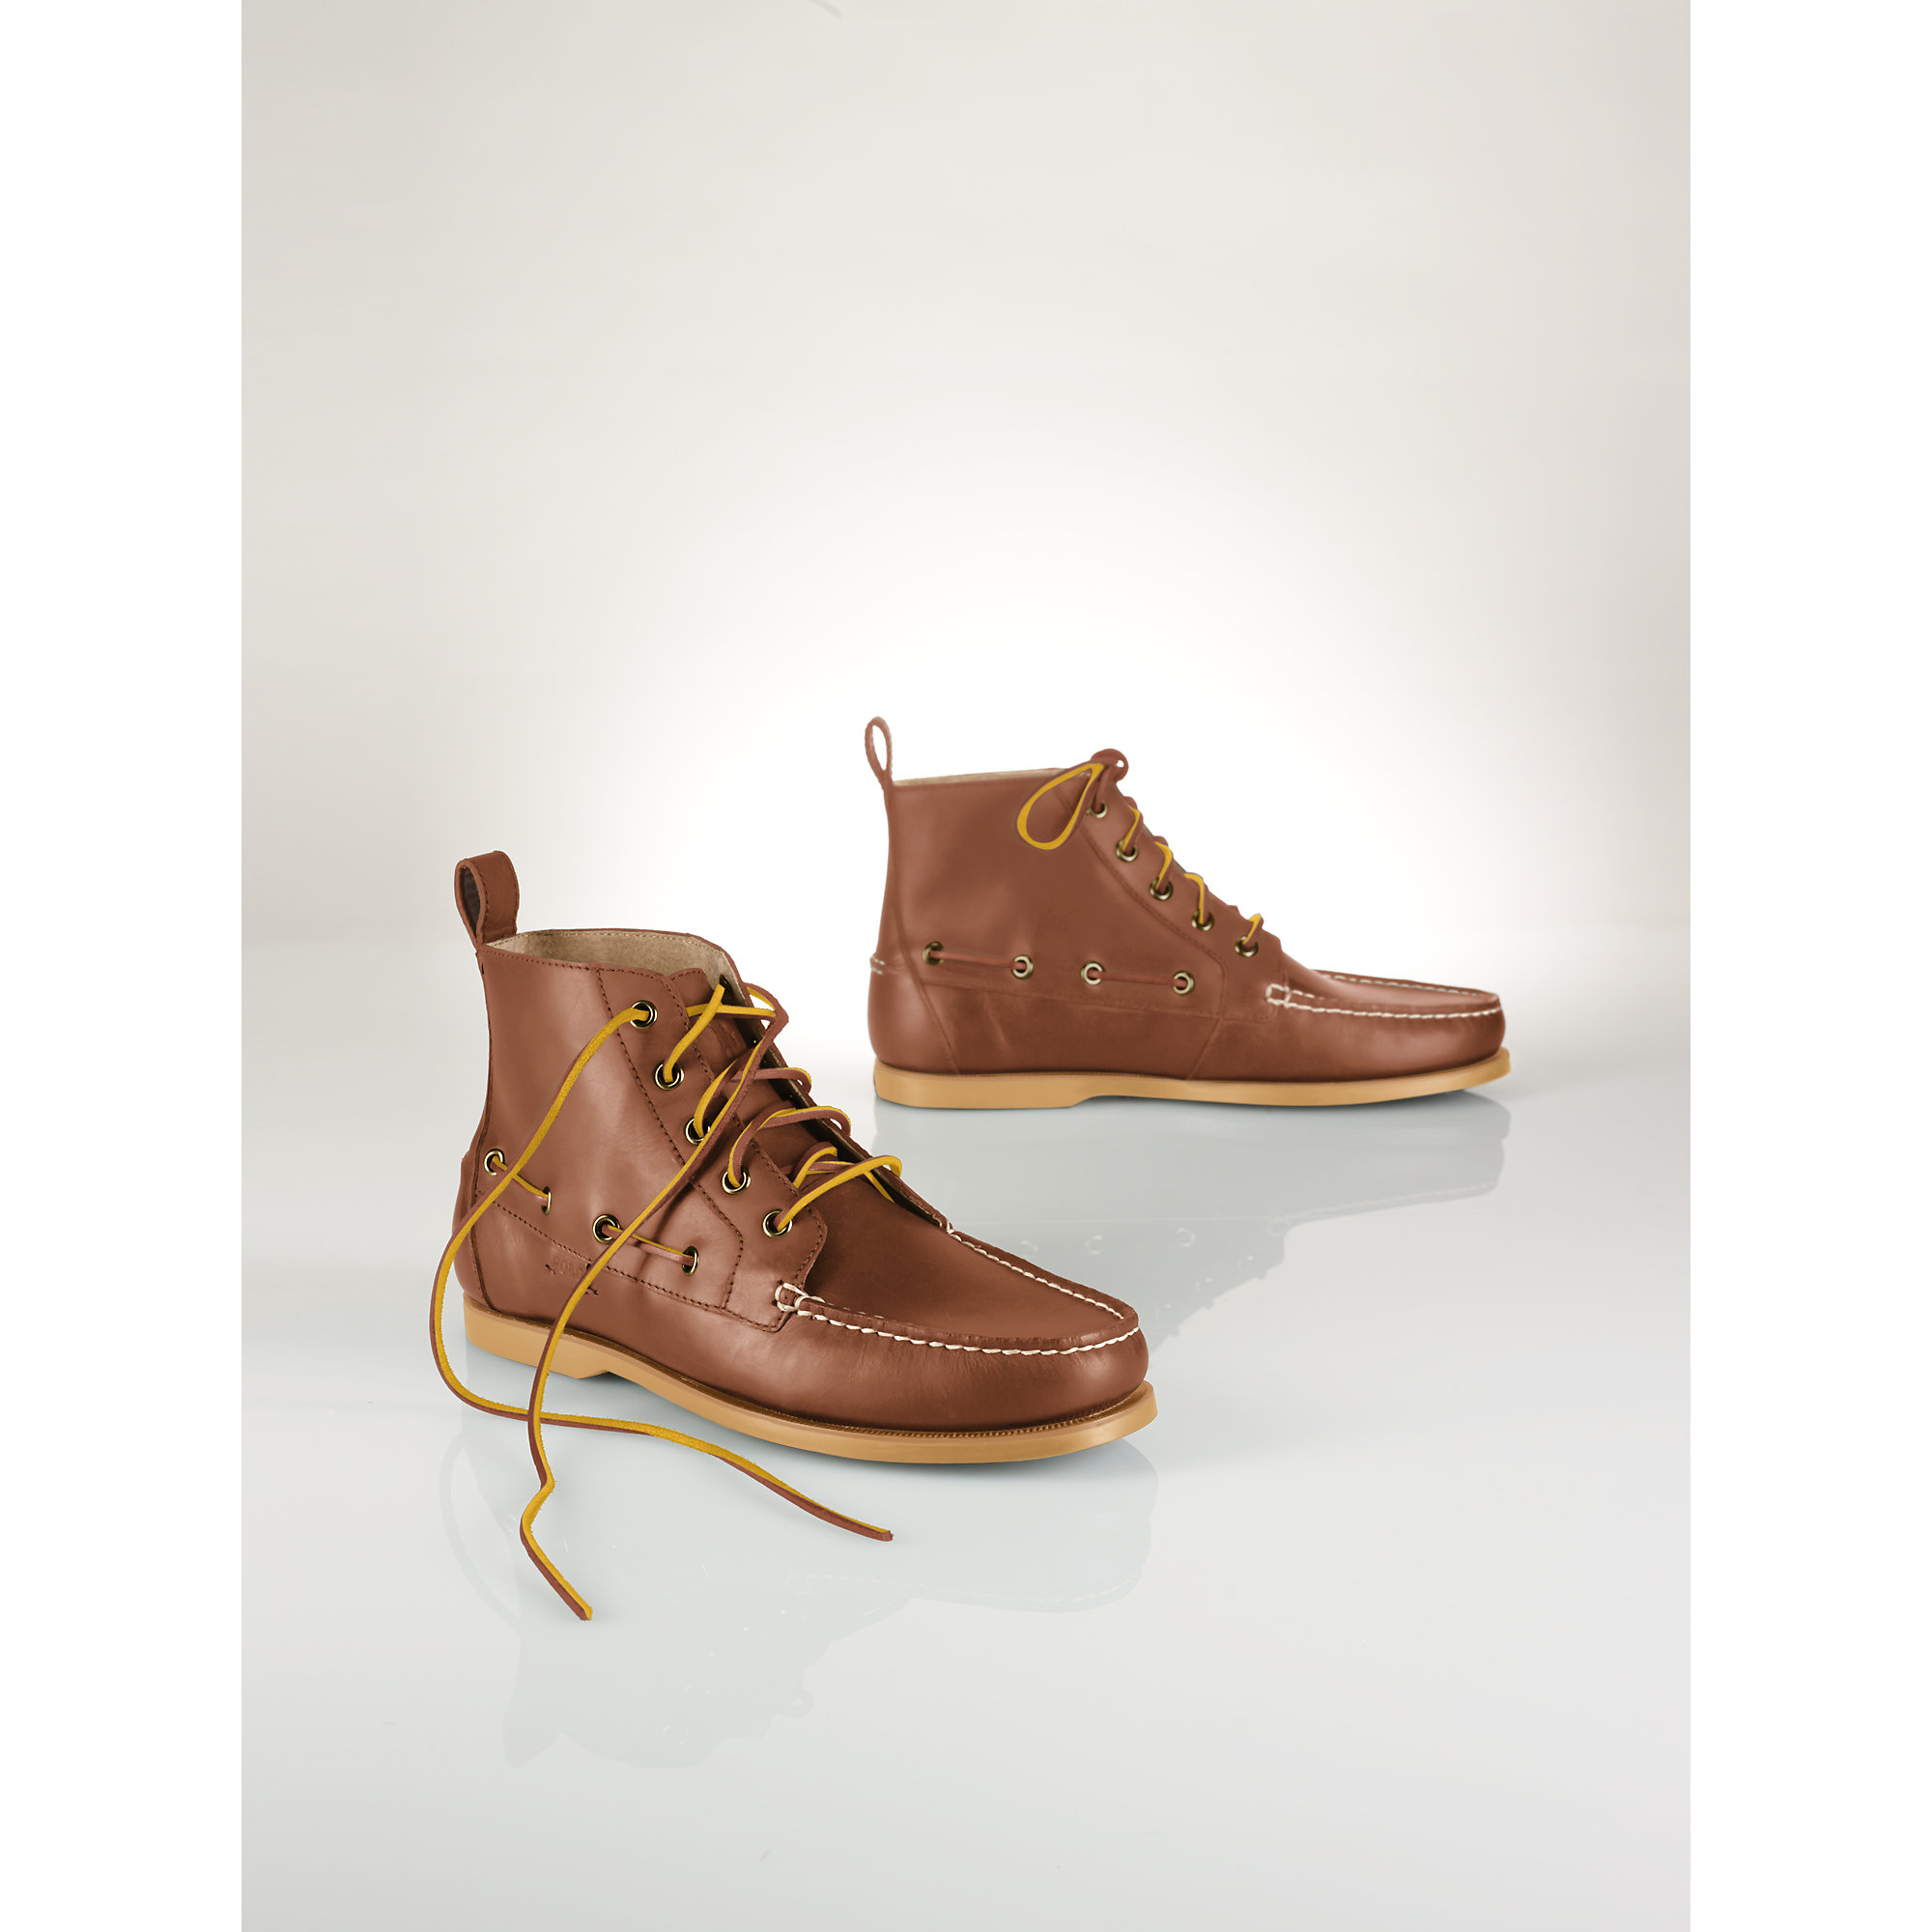 polo ralph lauren leather boots